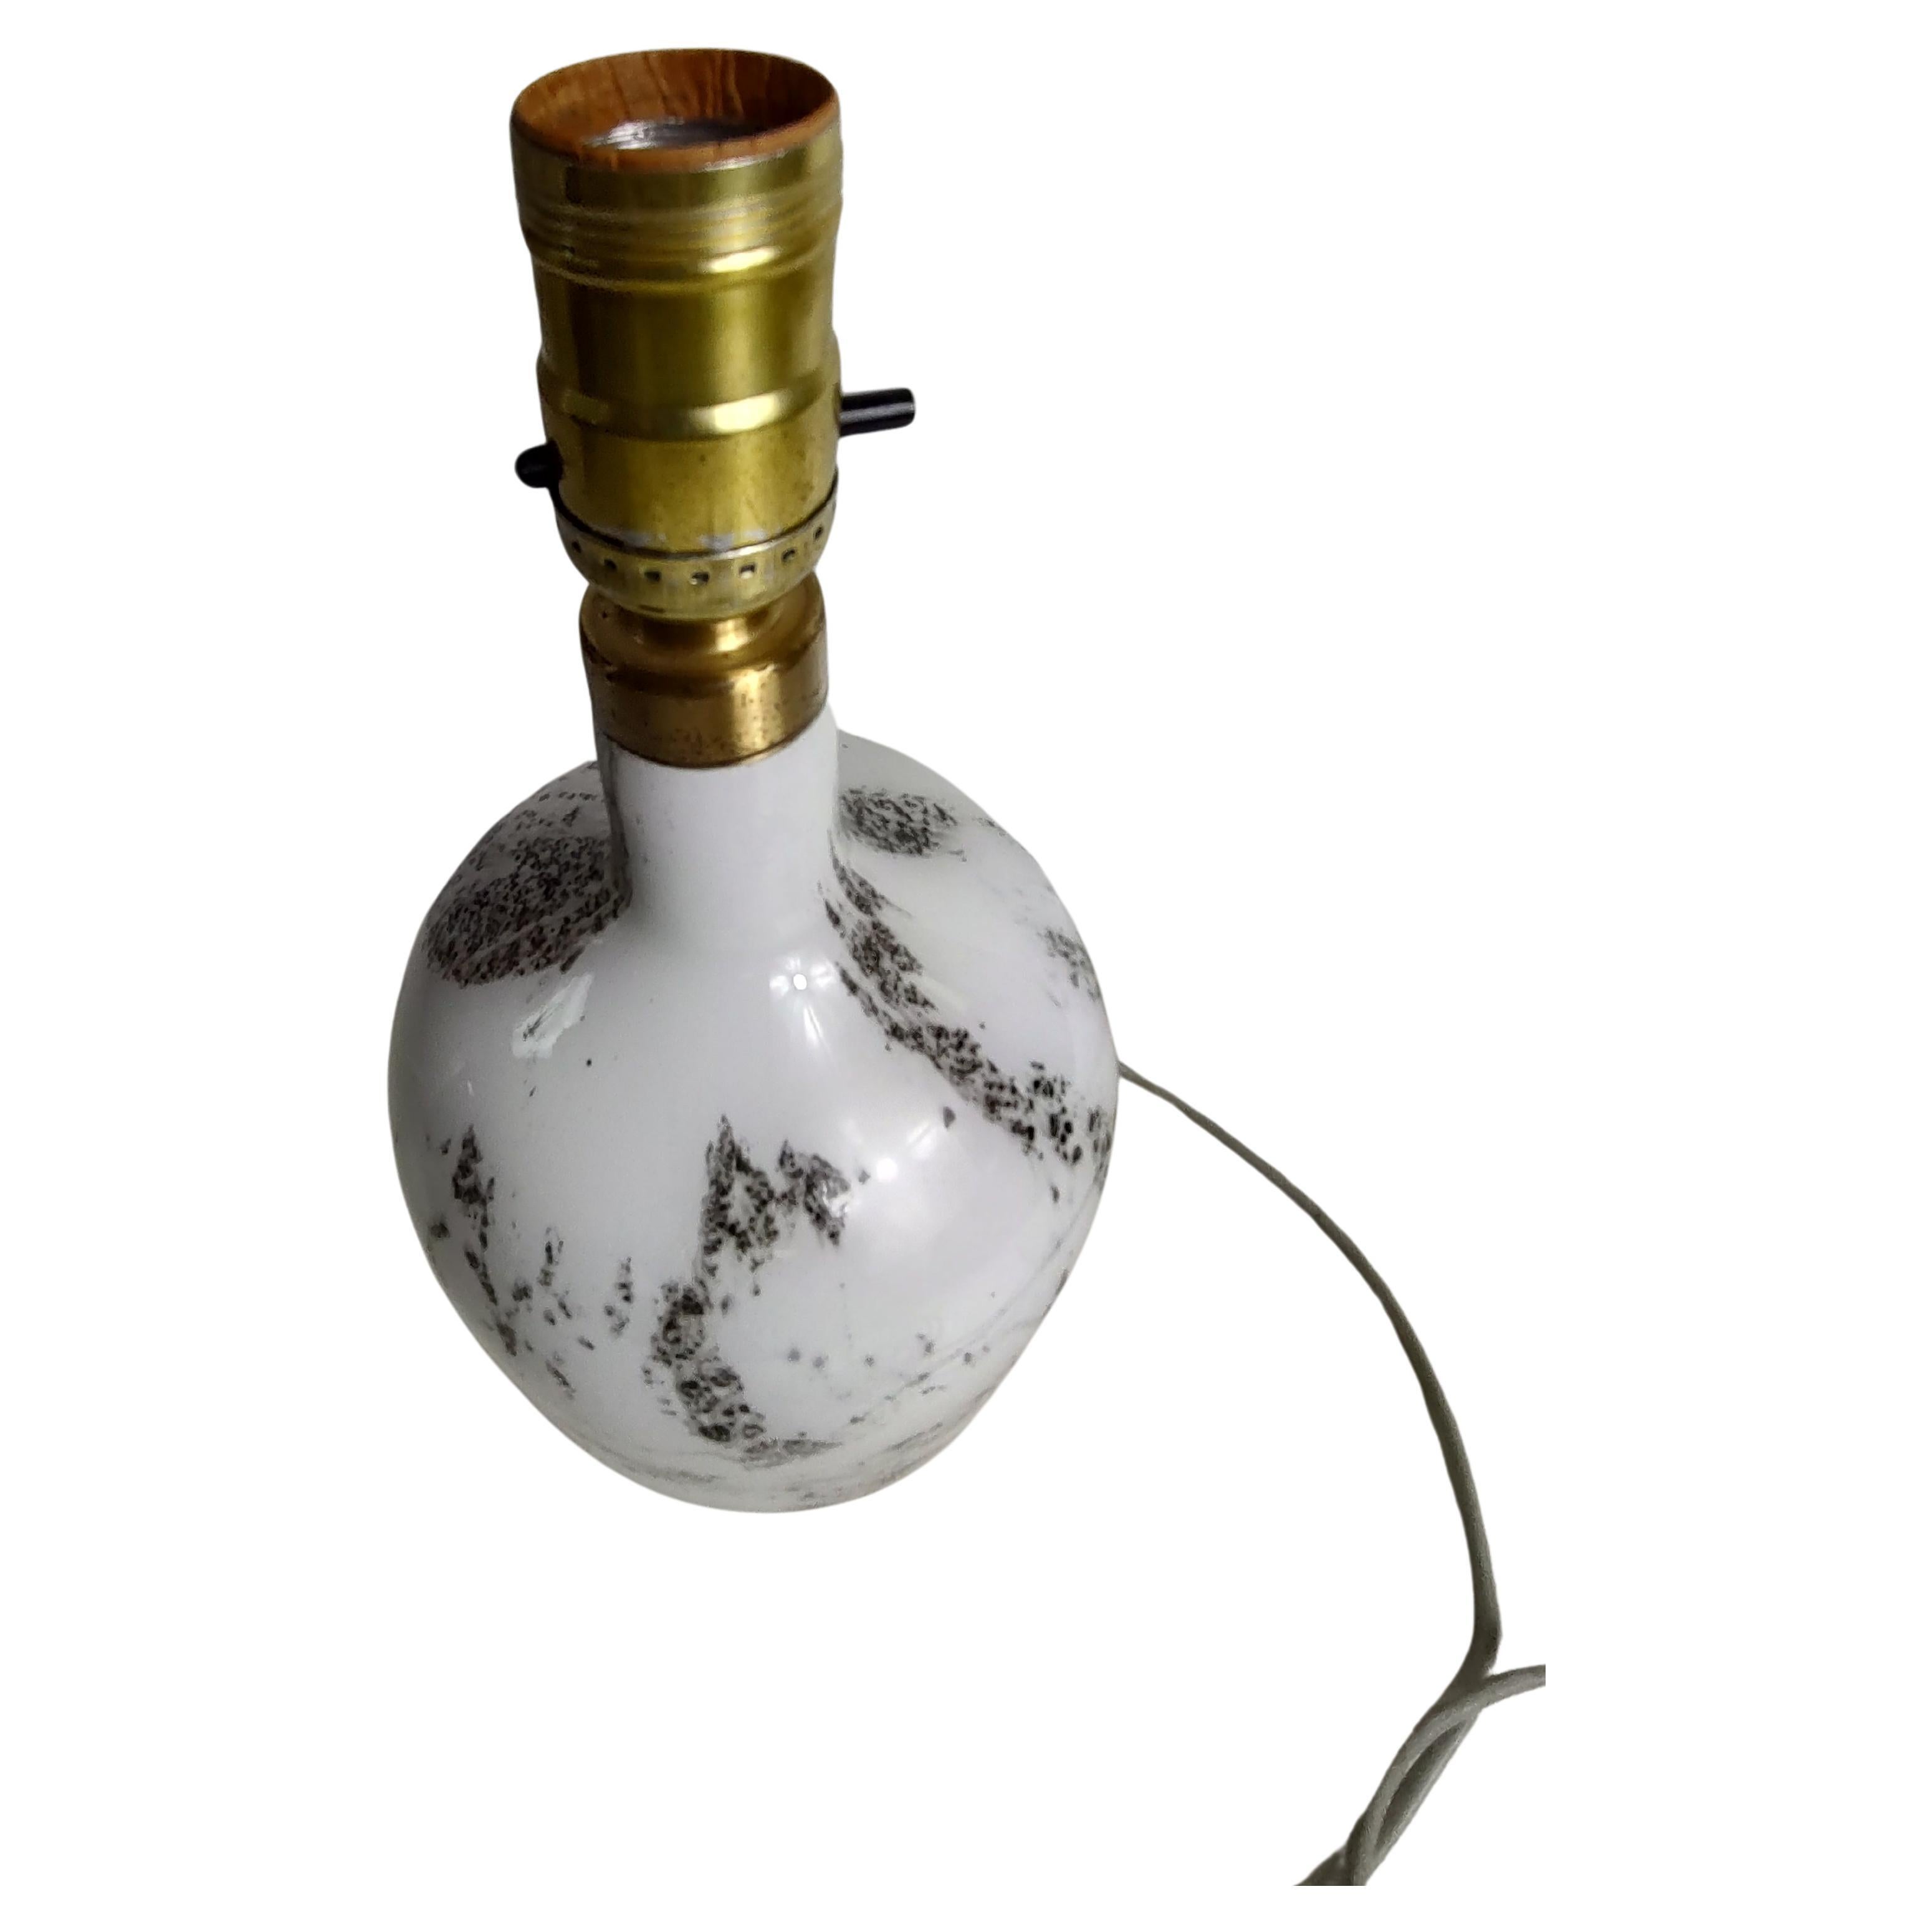 Fabulous petite hand blown art glass lamp in a squat bottle form. In excellent vintage condition with no wear. Switch on cord as well as socket.